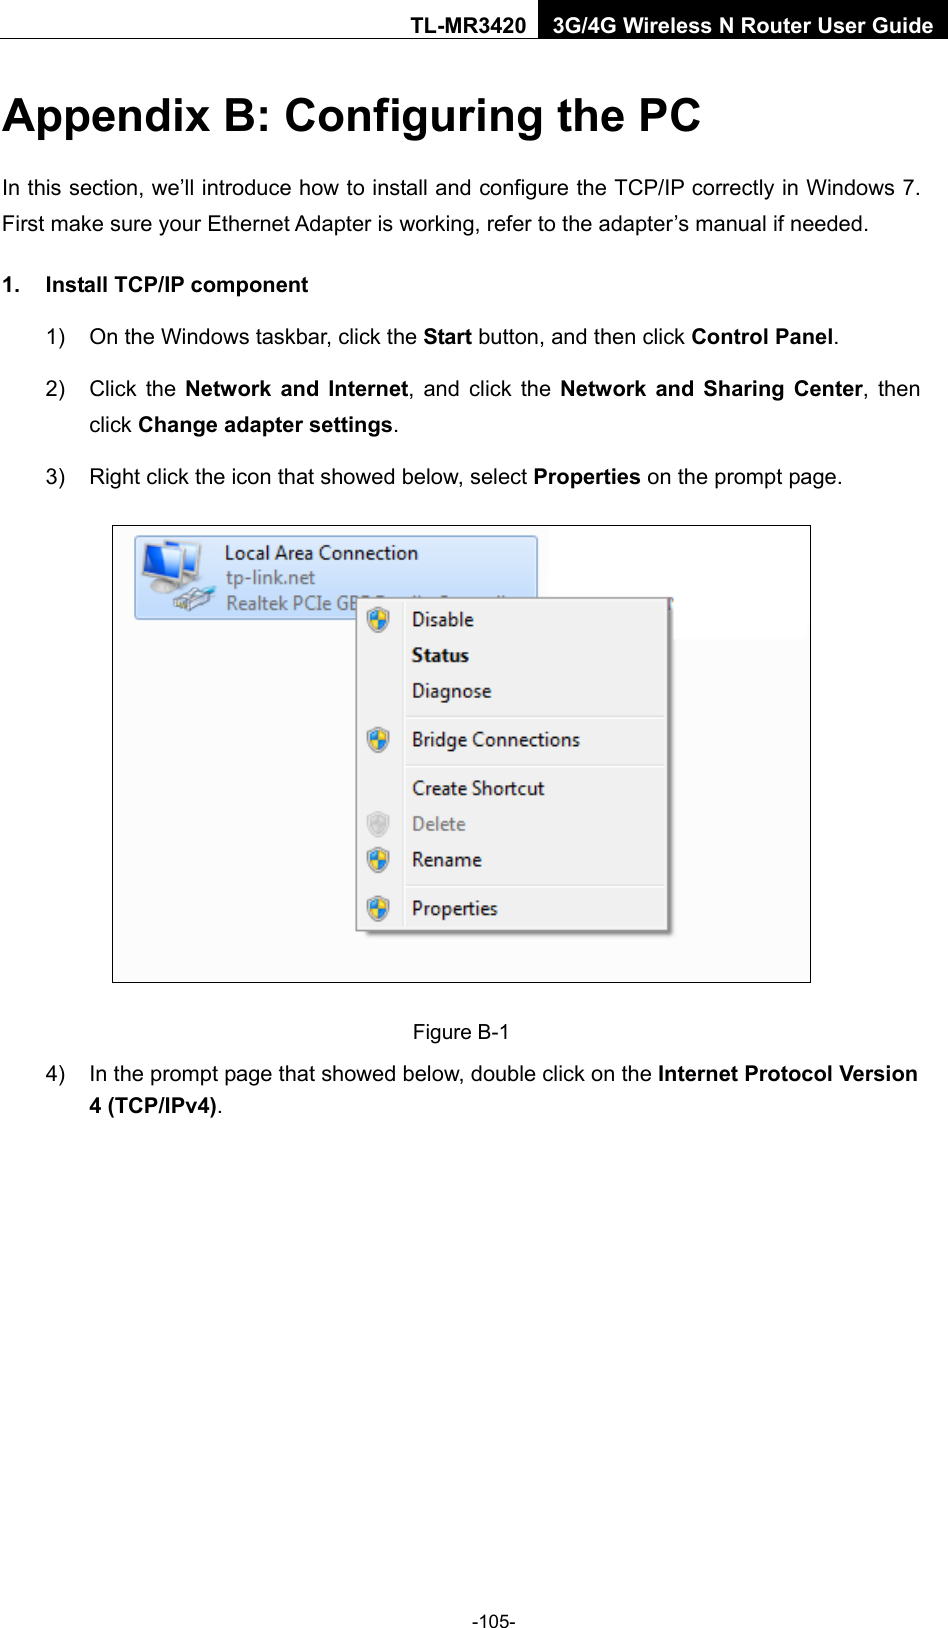    -105- TL-MR3420 3G/4G Wireless N Router User Guide Appendix B: Configuring the PC In this section, we’ll introduce how to install and configure the TCP/IP correctly in Windows 7. First make sure your Ethernet Adapter is working, refer to the adapter’s manual if needed. 1. Install TCP/IP component 1) On the Windows taskbar, click the Start button, and then click Control Panel. 2) Click  the  Network and Internet, and click the Network and Sharing Center,  then click Change adapter settings. 3) Right click the icon that showed below, select Properties on the prompt page.  Figure B-1 4) In the prompt page that showed below, double click on the Internet Protocol Version 4 (TCP/IPv4). 